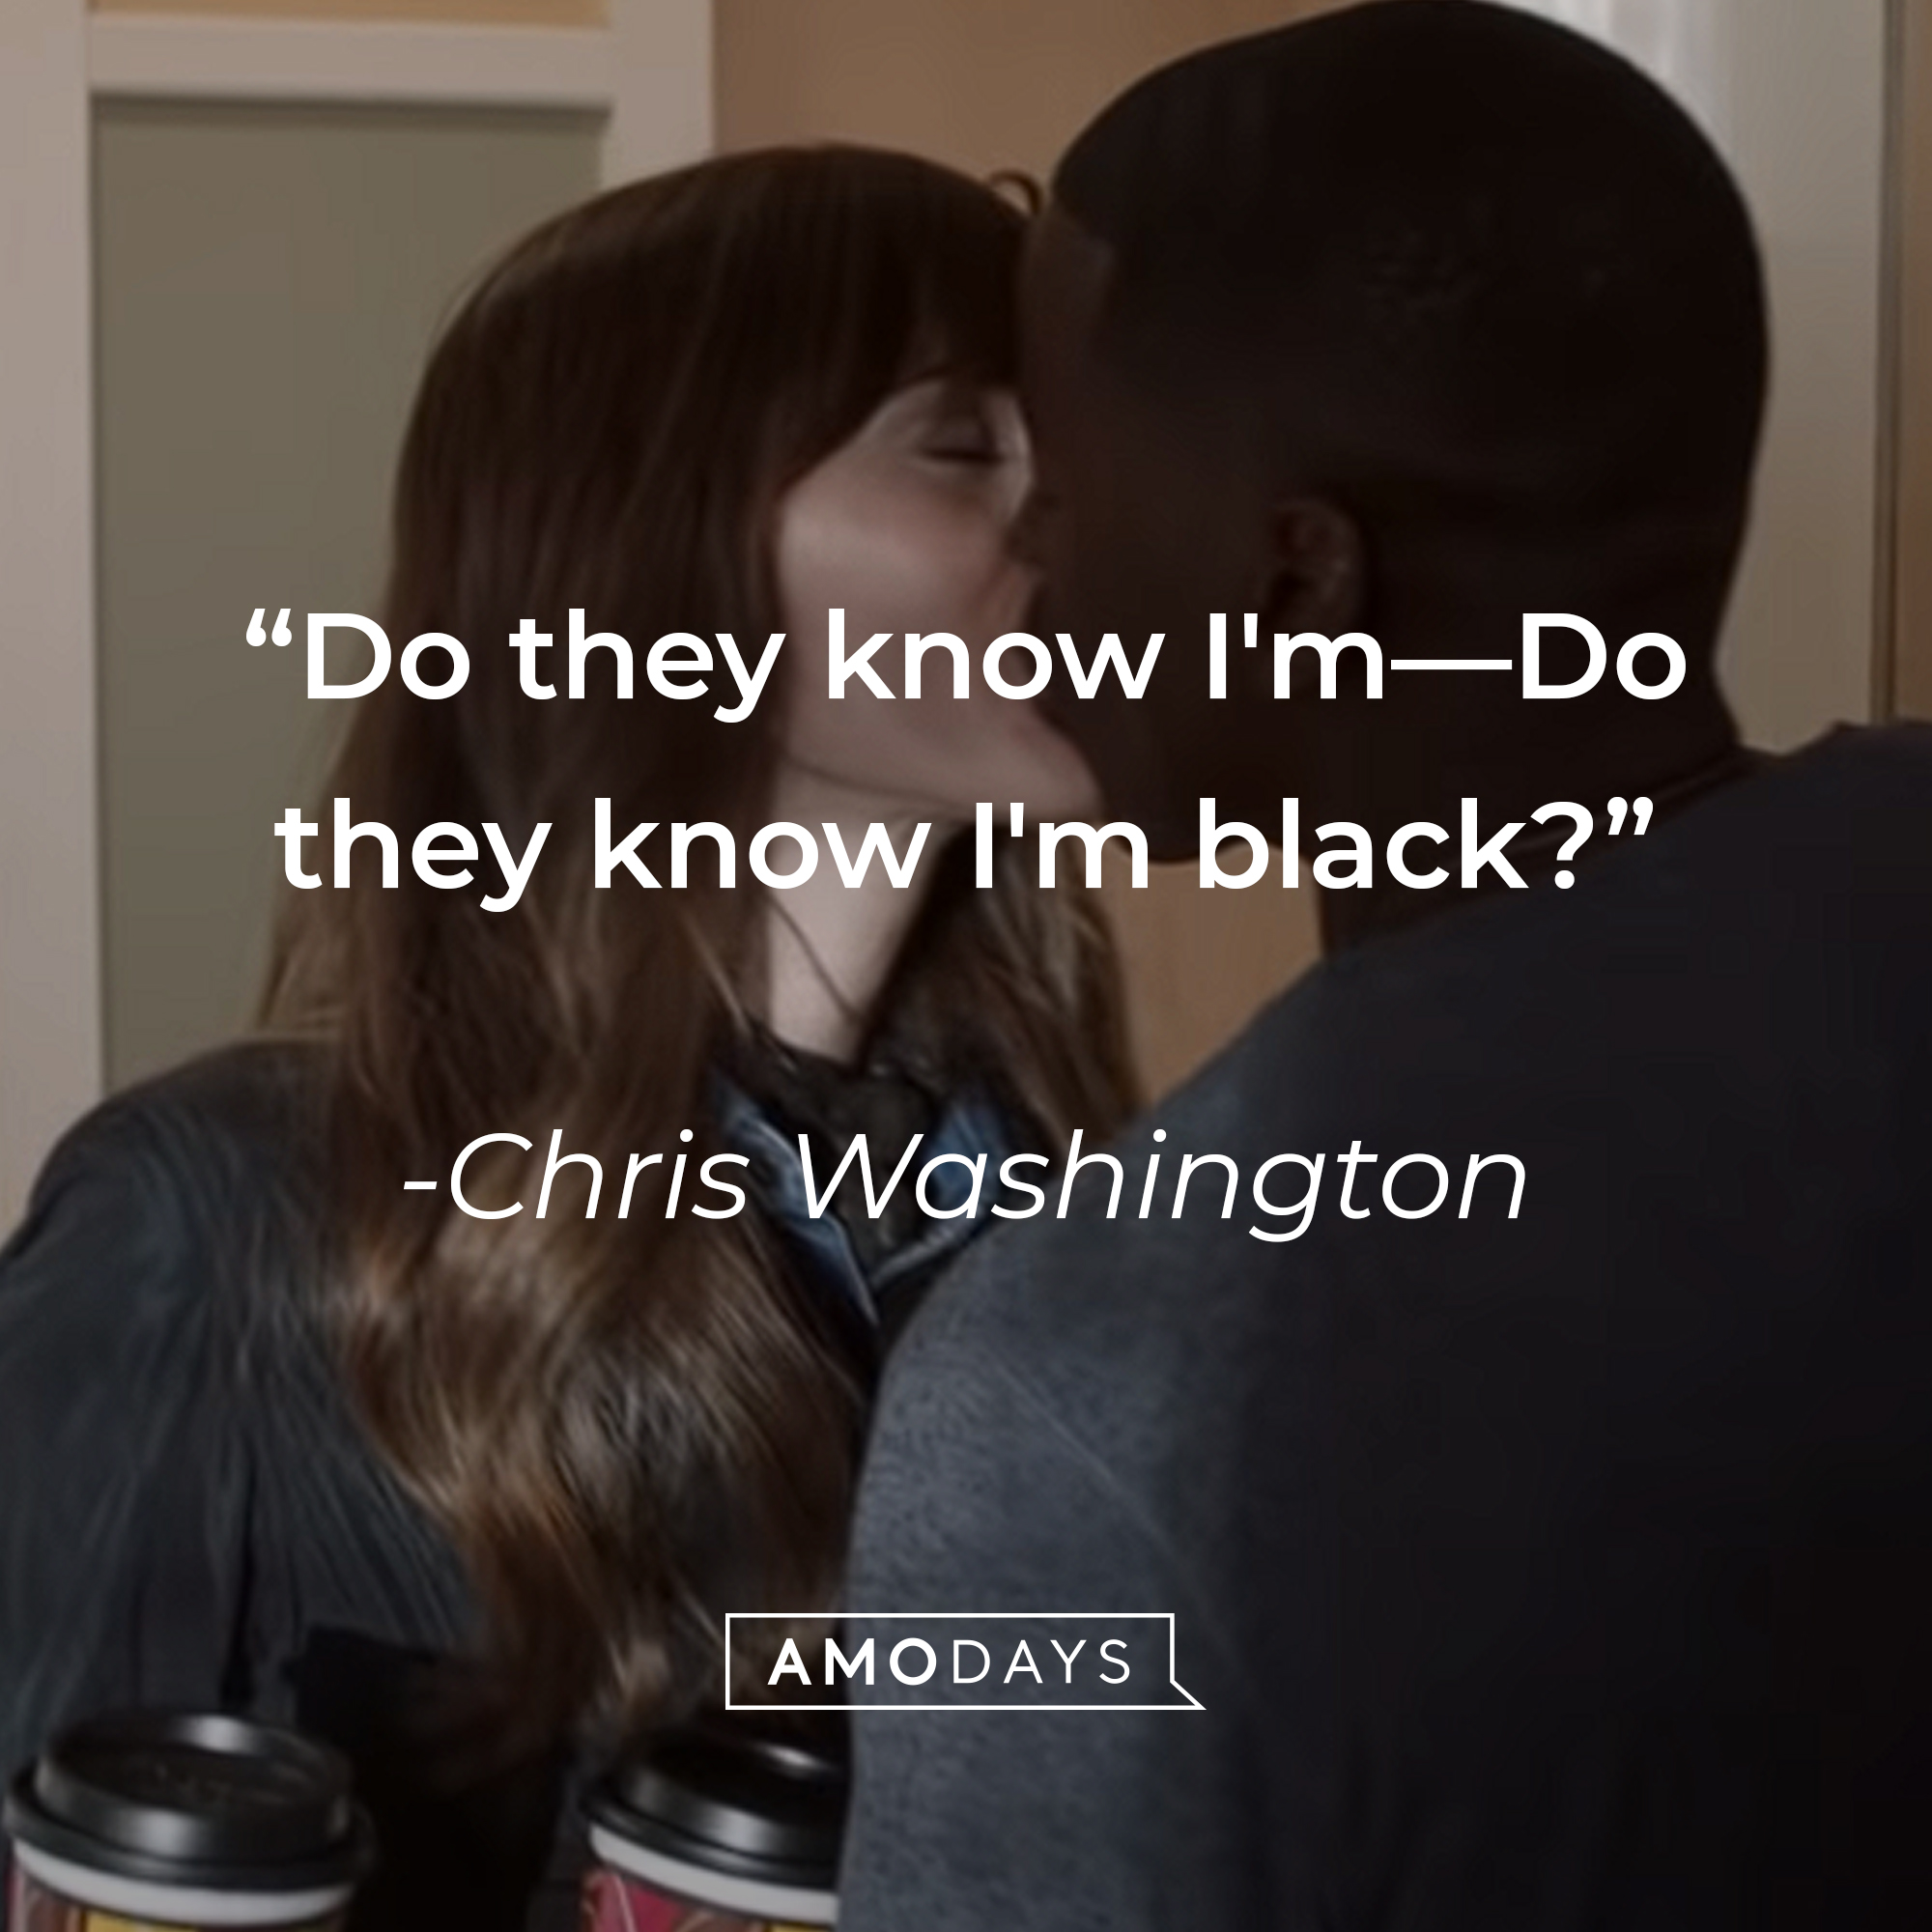 An image of Chris Washington and Rose Armitage with Washington’s quote: “Do they know I'm—Do they know I'm black?” | Source: youtube.com/UniversalpicturesIta